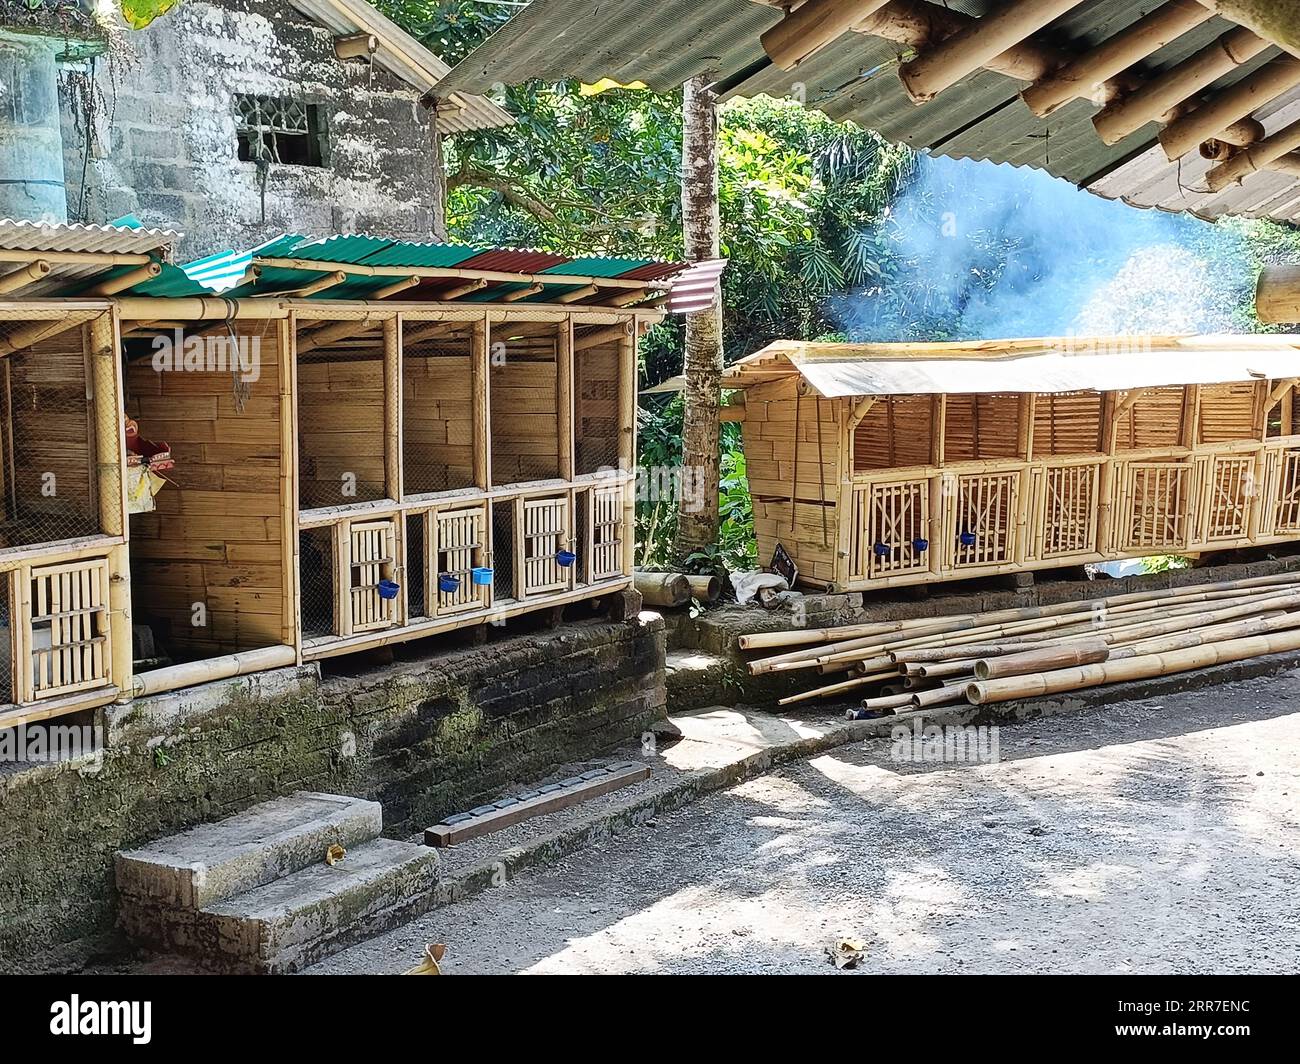 Newly-constructed bamboo chicken coop in a rural Balinese family compound. Bamboo is widely used for construction around Bali and the rest of Asia. Stock Photo